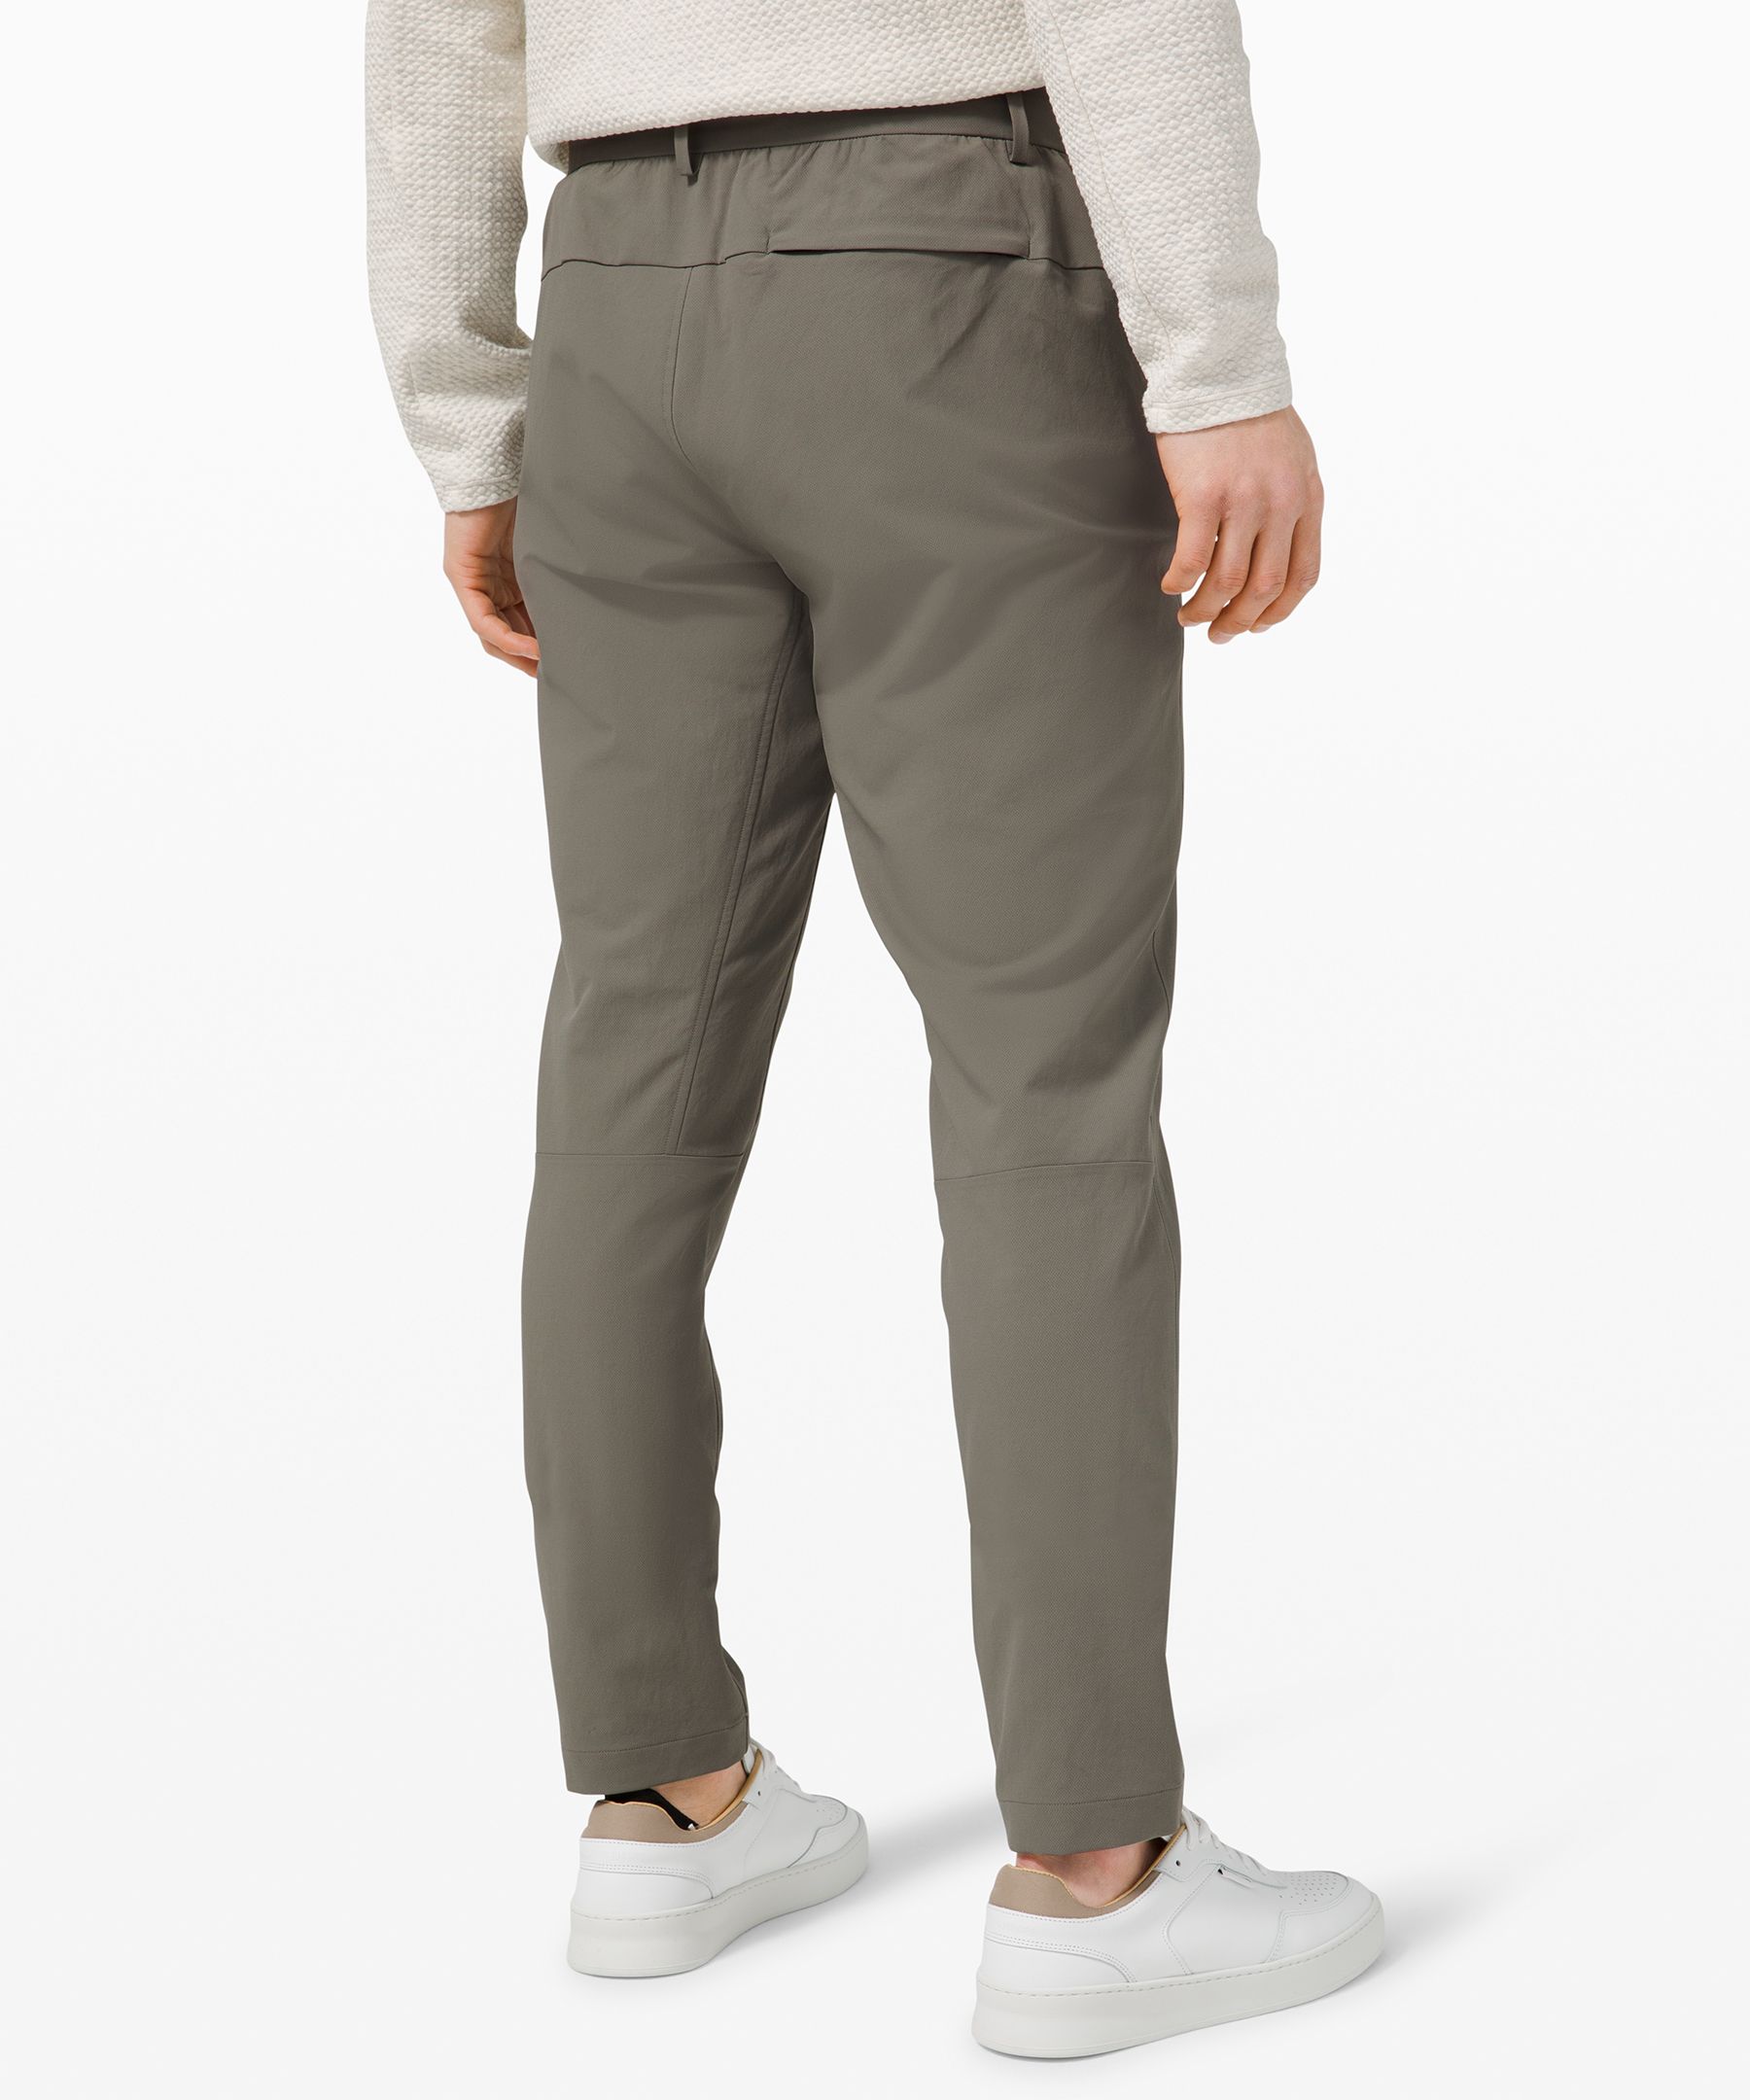 Lululemon Flare Pants Outfits For Men  International Society of Precision  Agriculture